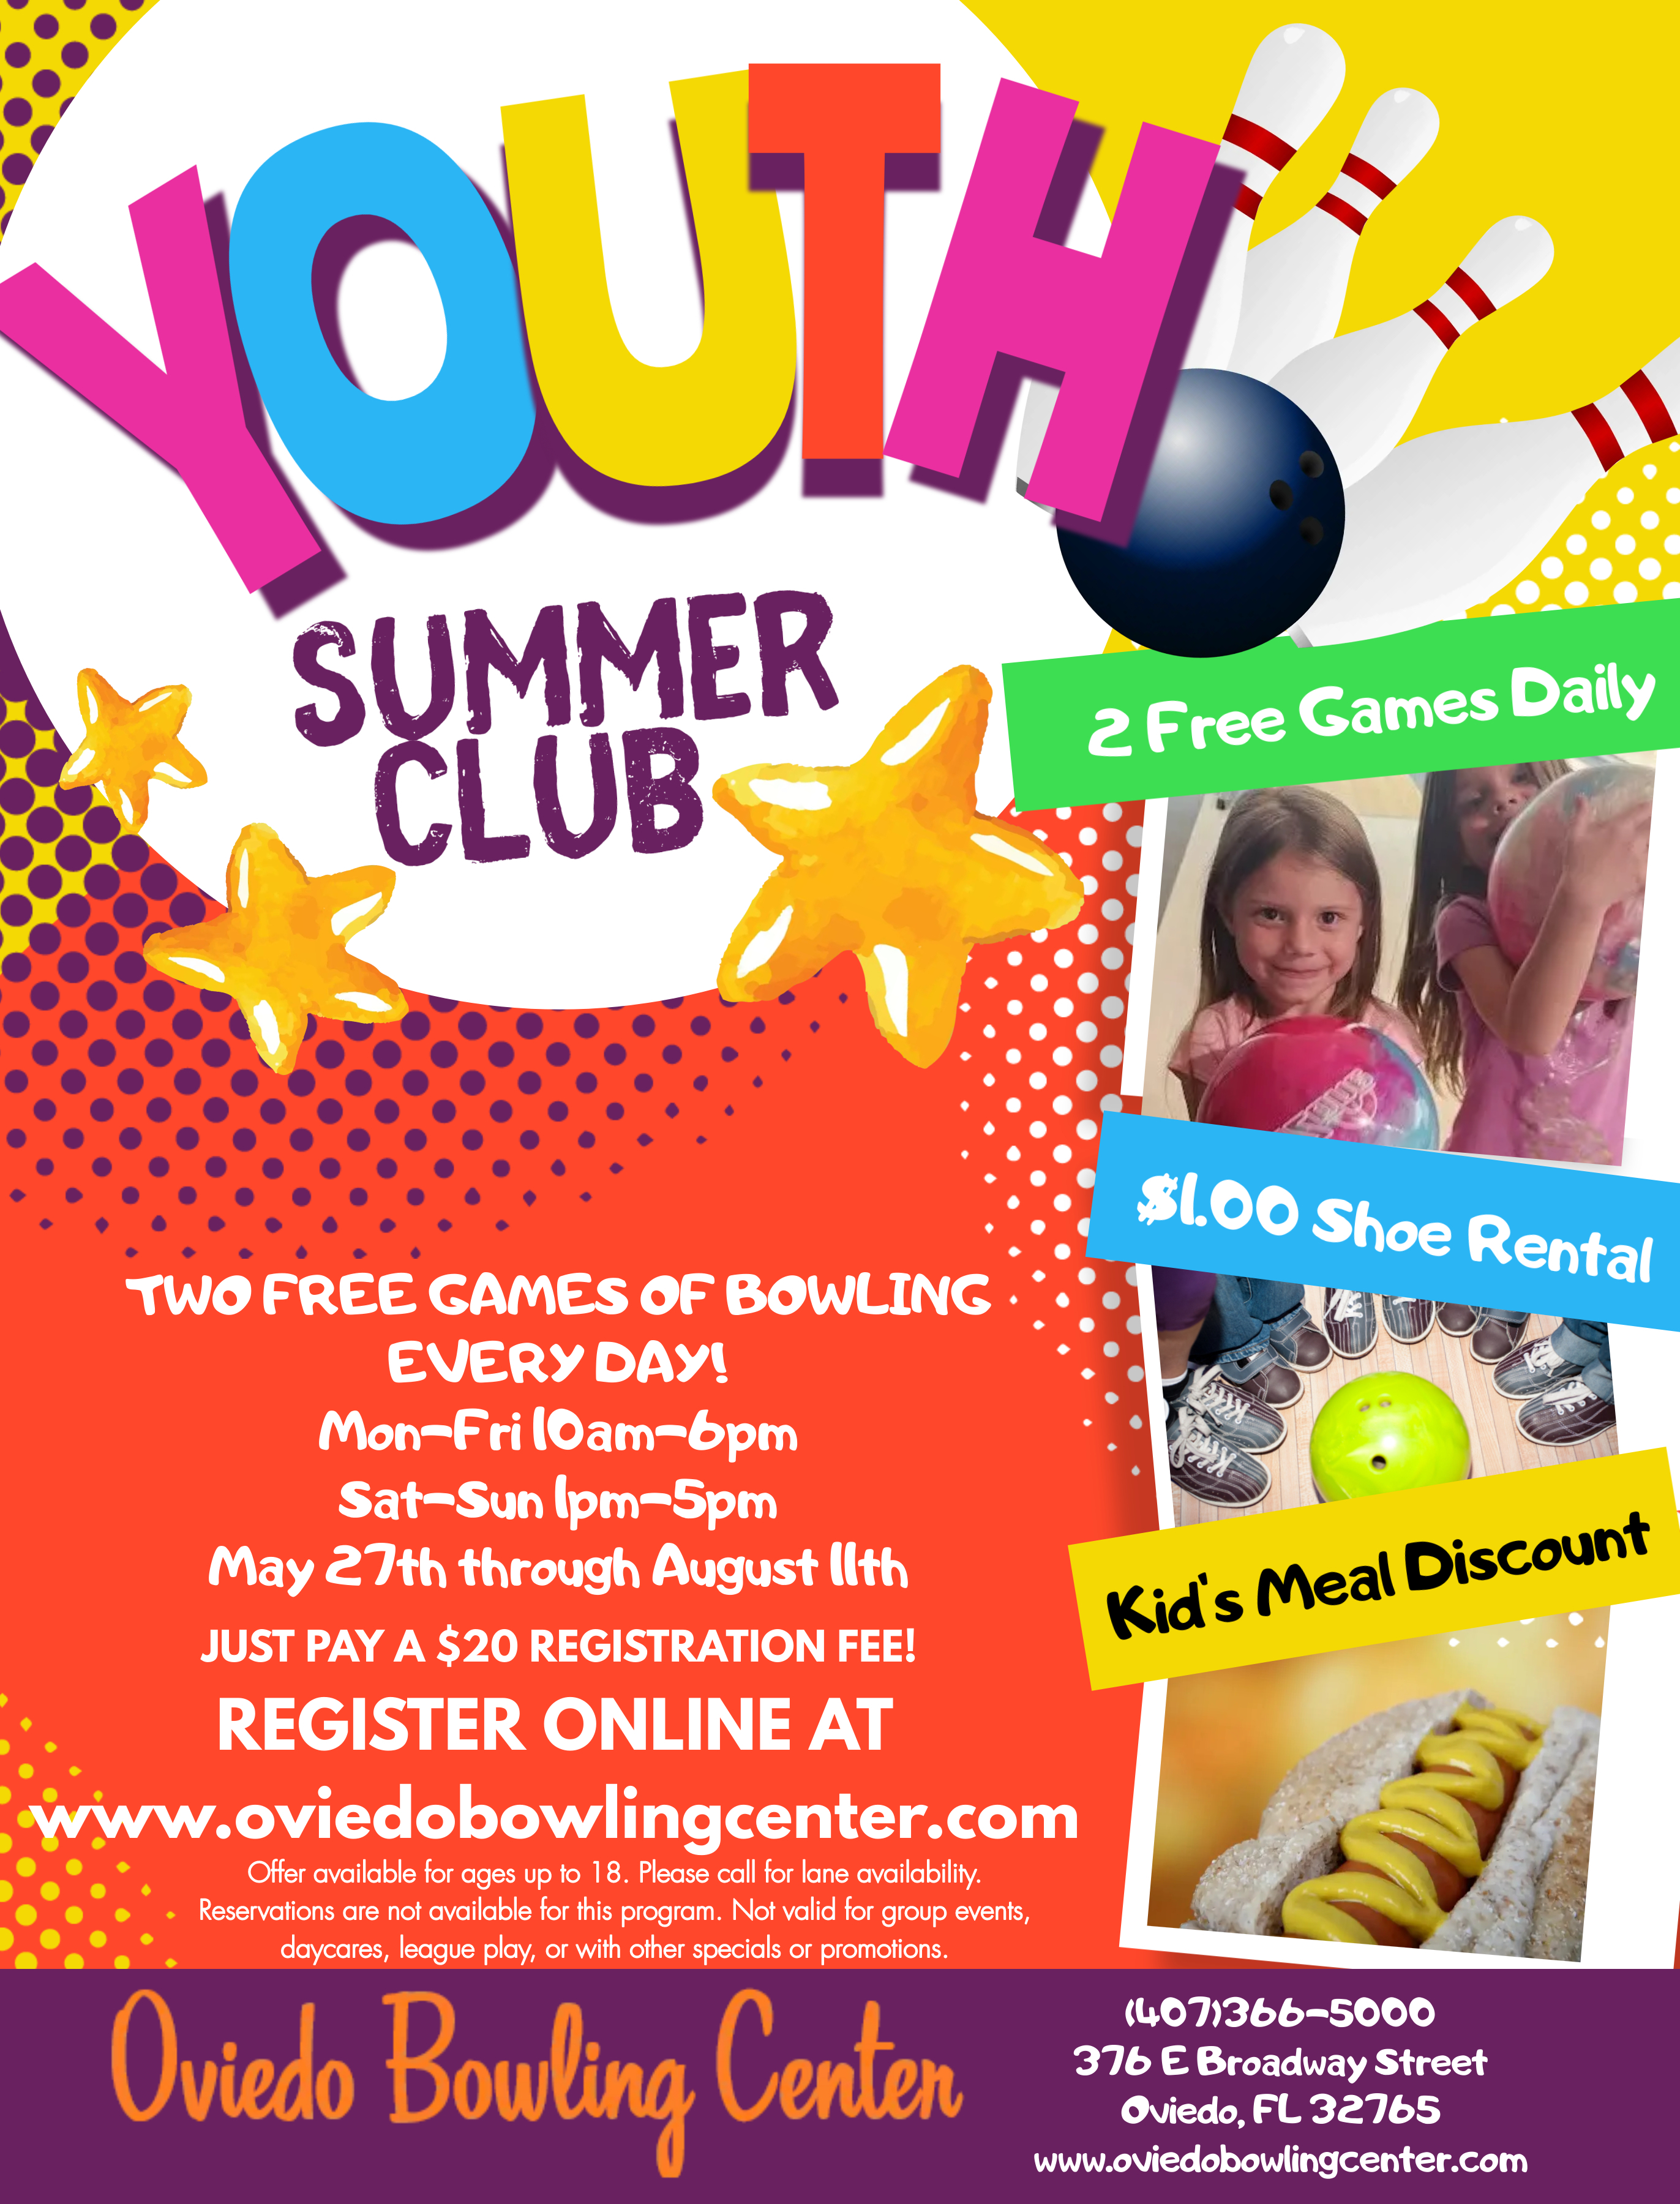 OBC Summer Youth Club Flyer Youth Summer Club registration is $20 per person and will get each registered member TWO free games every day of the summer, shoe rental is $1.00.  Members will receive 10% off kids meals.  Usable times:   M-F 10am-6pm  Sat Sun 1pm-5pm